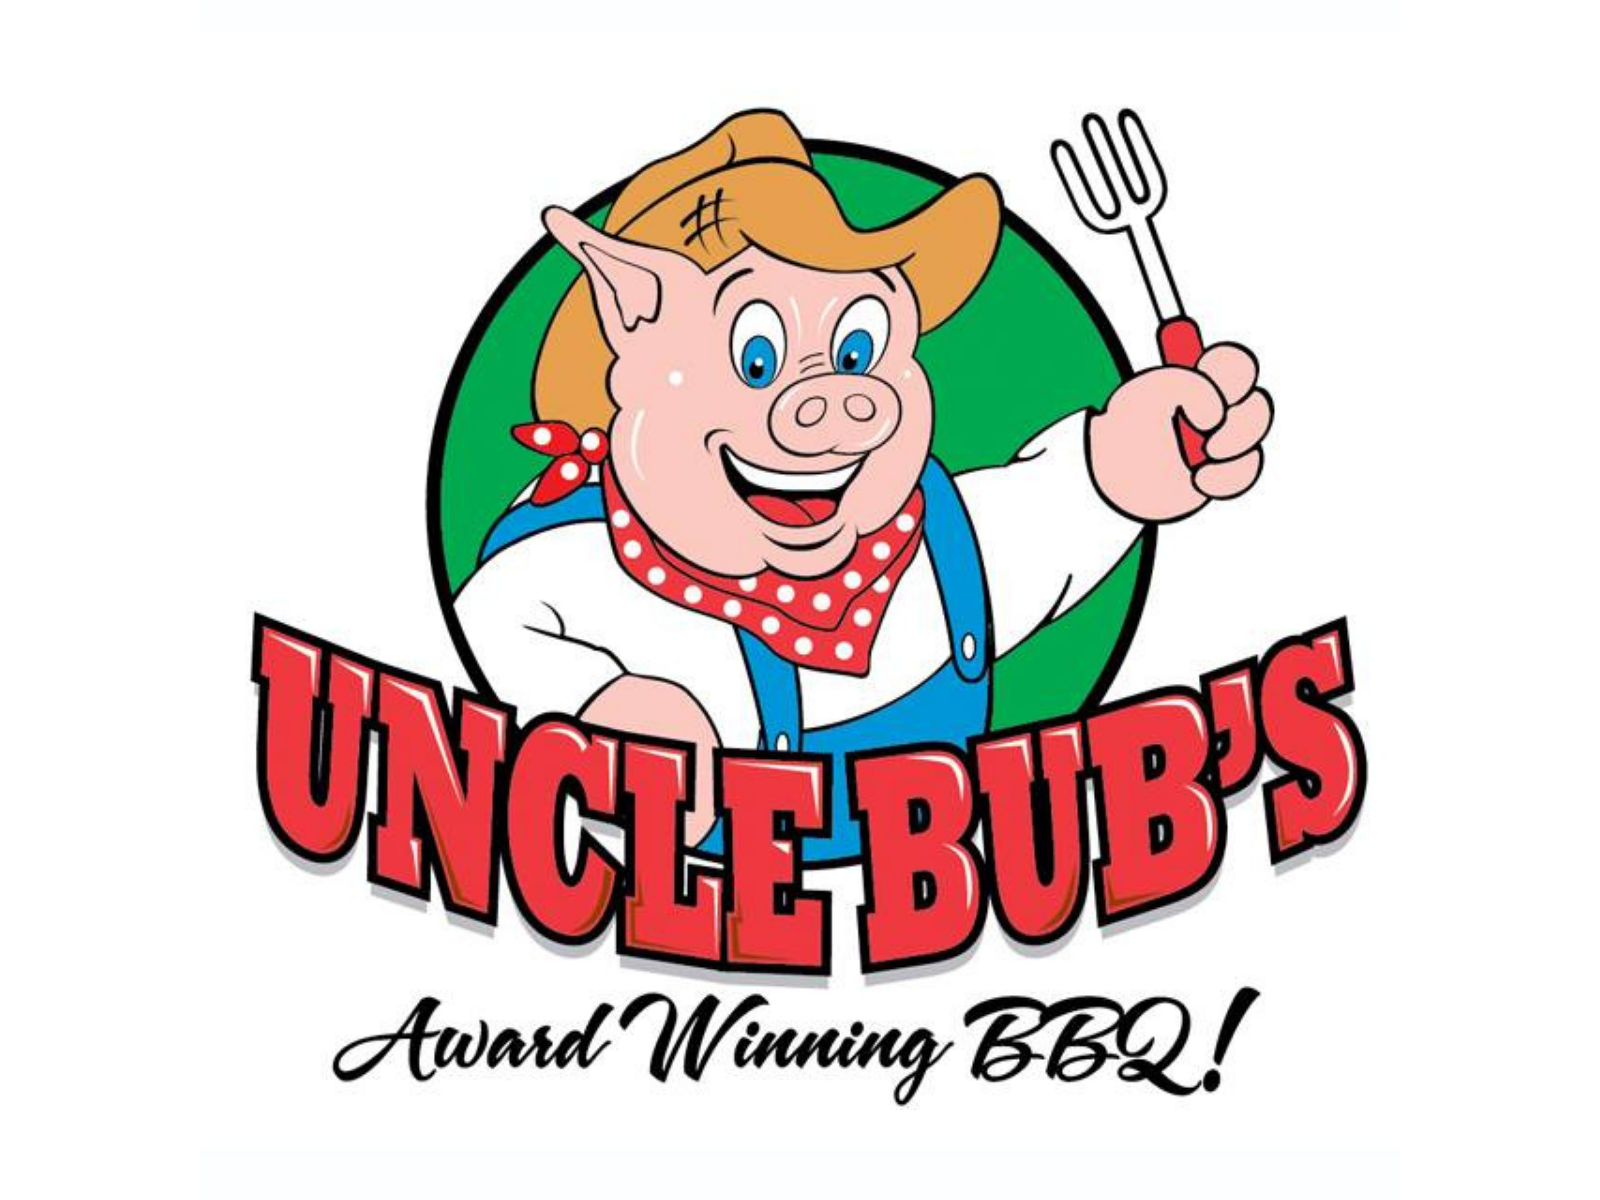 An Evening with Uncle Bubs BBQ